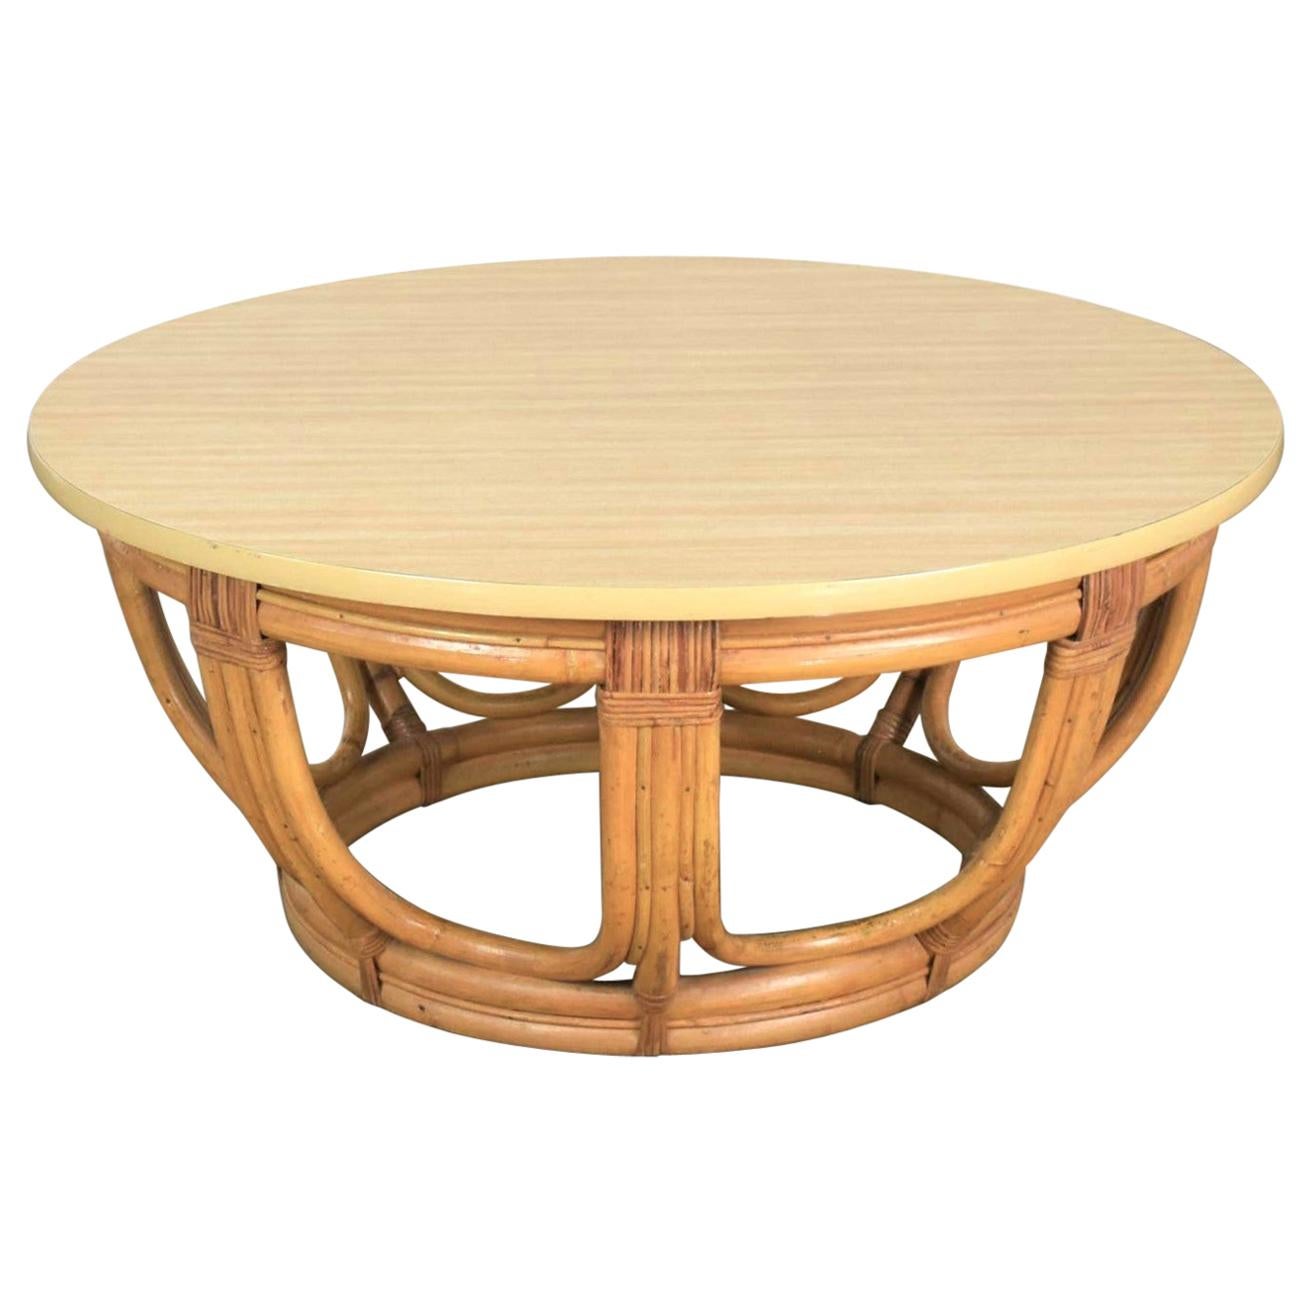 Vintage Round Rattan Drum Shape Coffee or End Table with Laminate Top For Sale